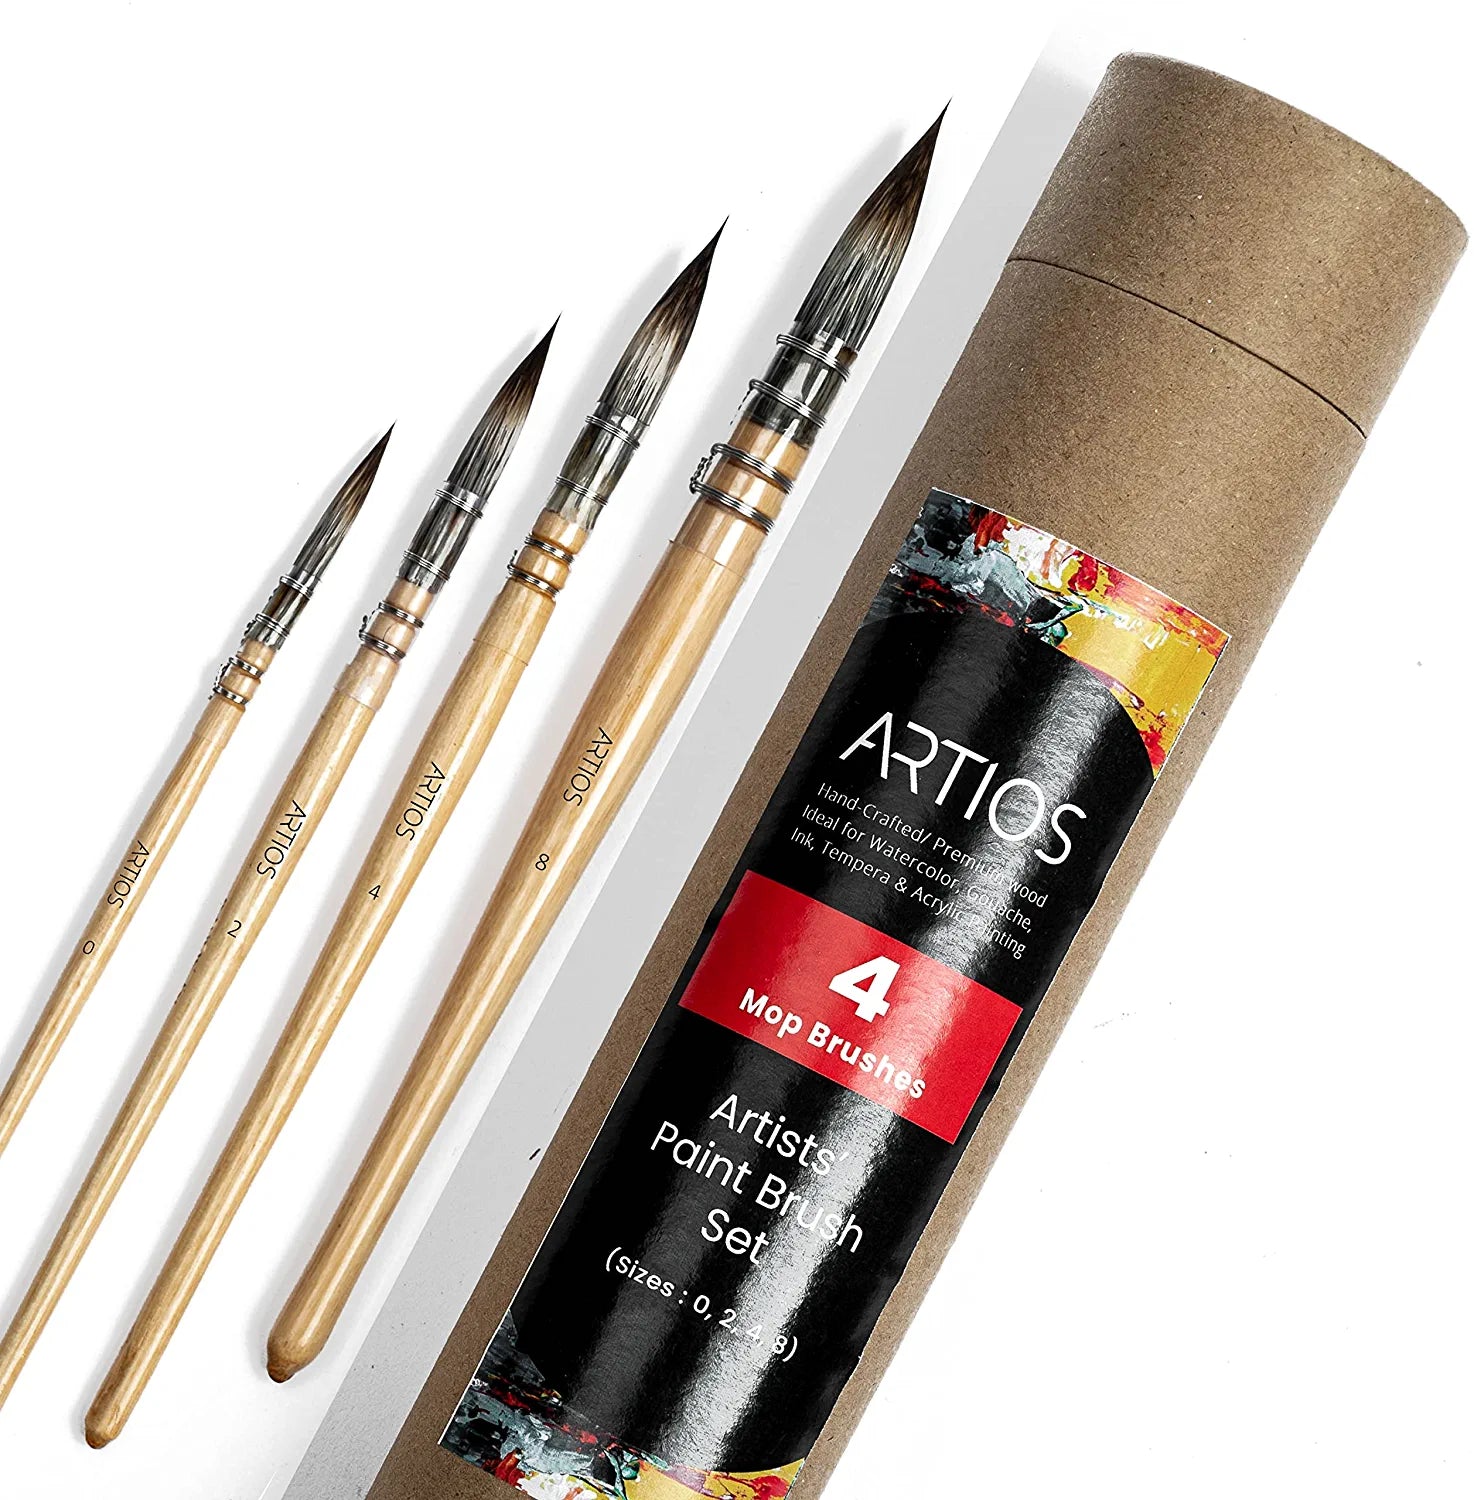 Assorted Set of 7 Round + Flat Paint Brushes at Rs 449.00, Howrah